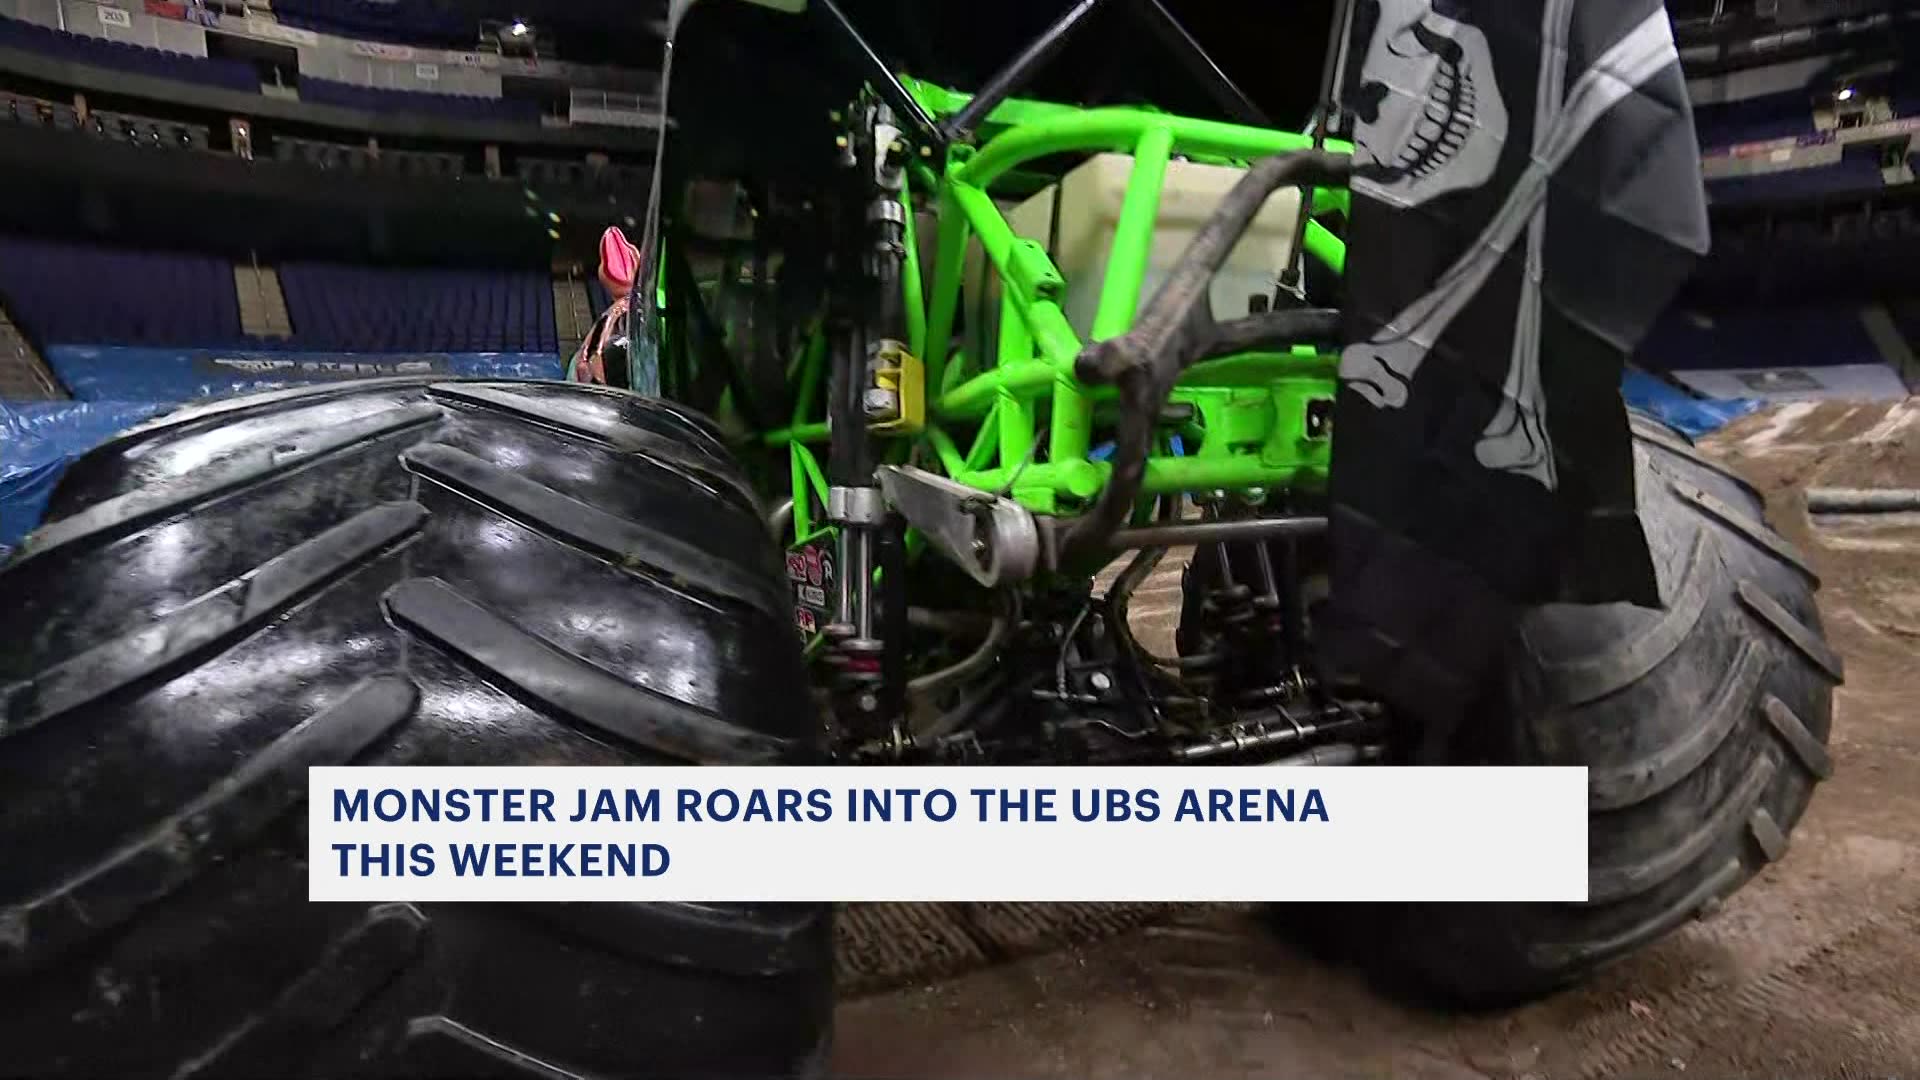 Monster Jam set to roar into UBS Arena this weekend